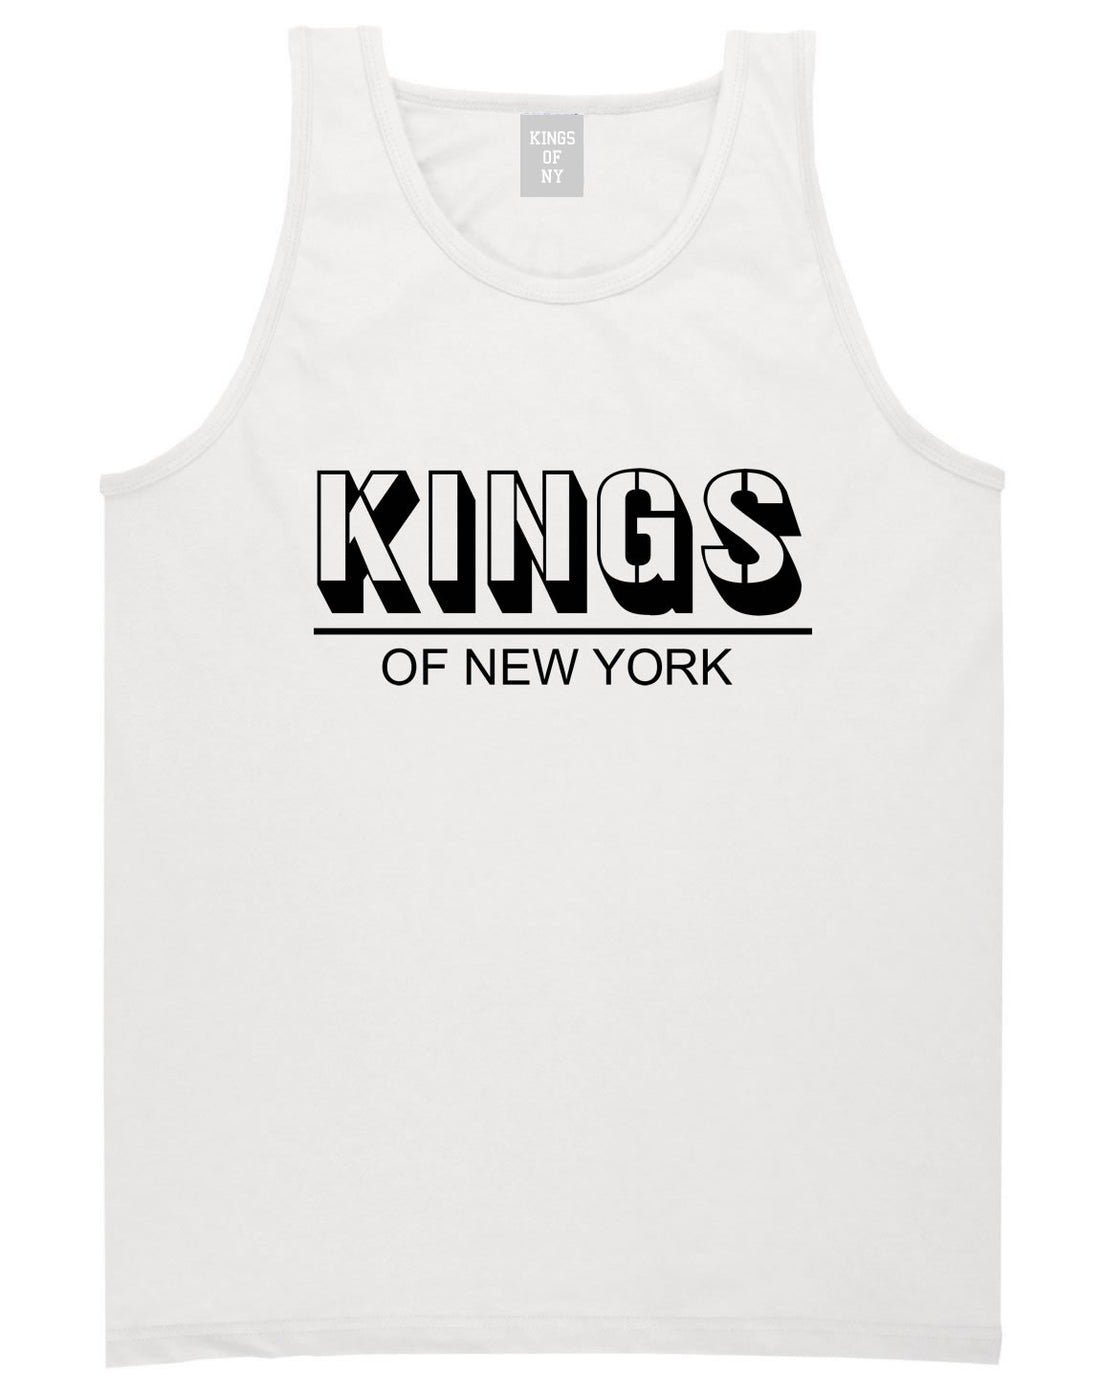 King Branded Block Letters Tank Top in White by Kings Of NY